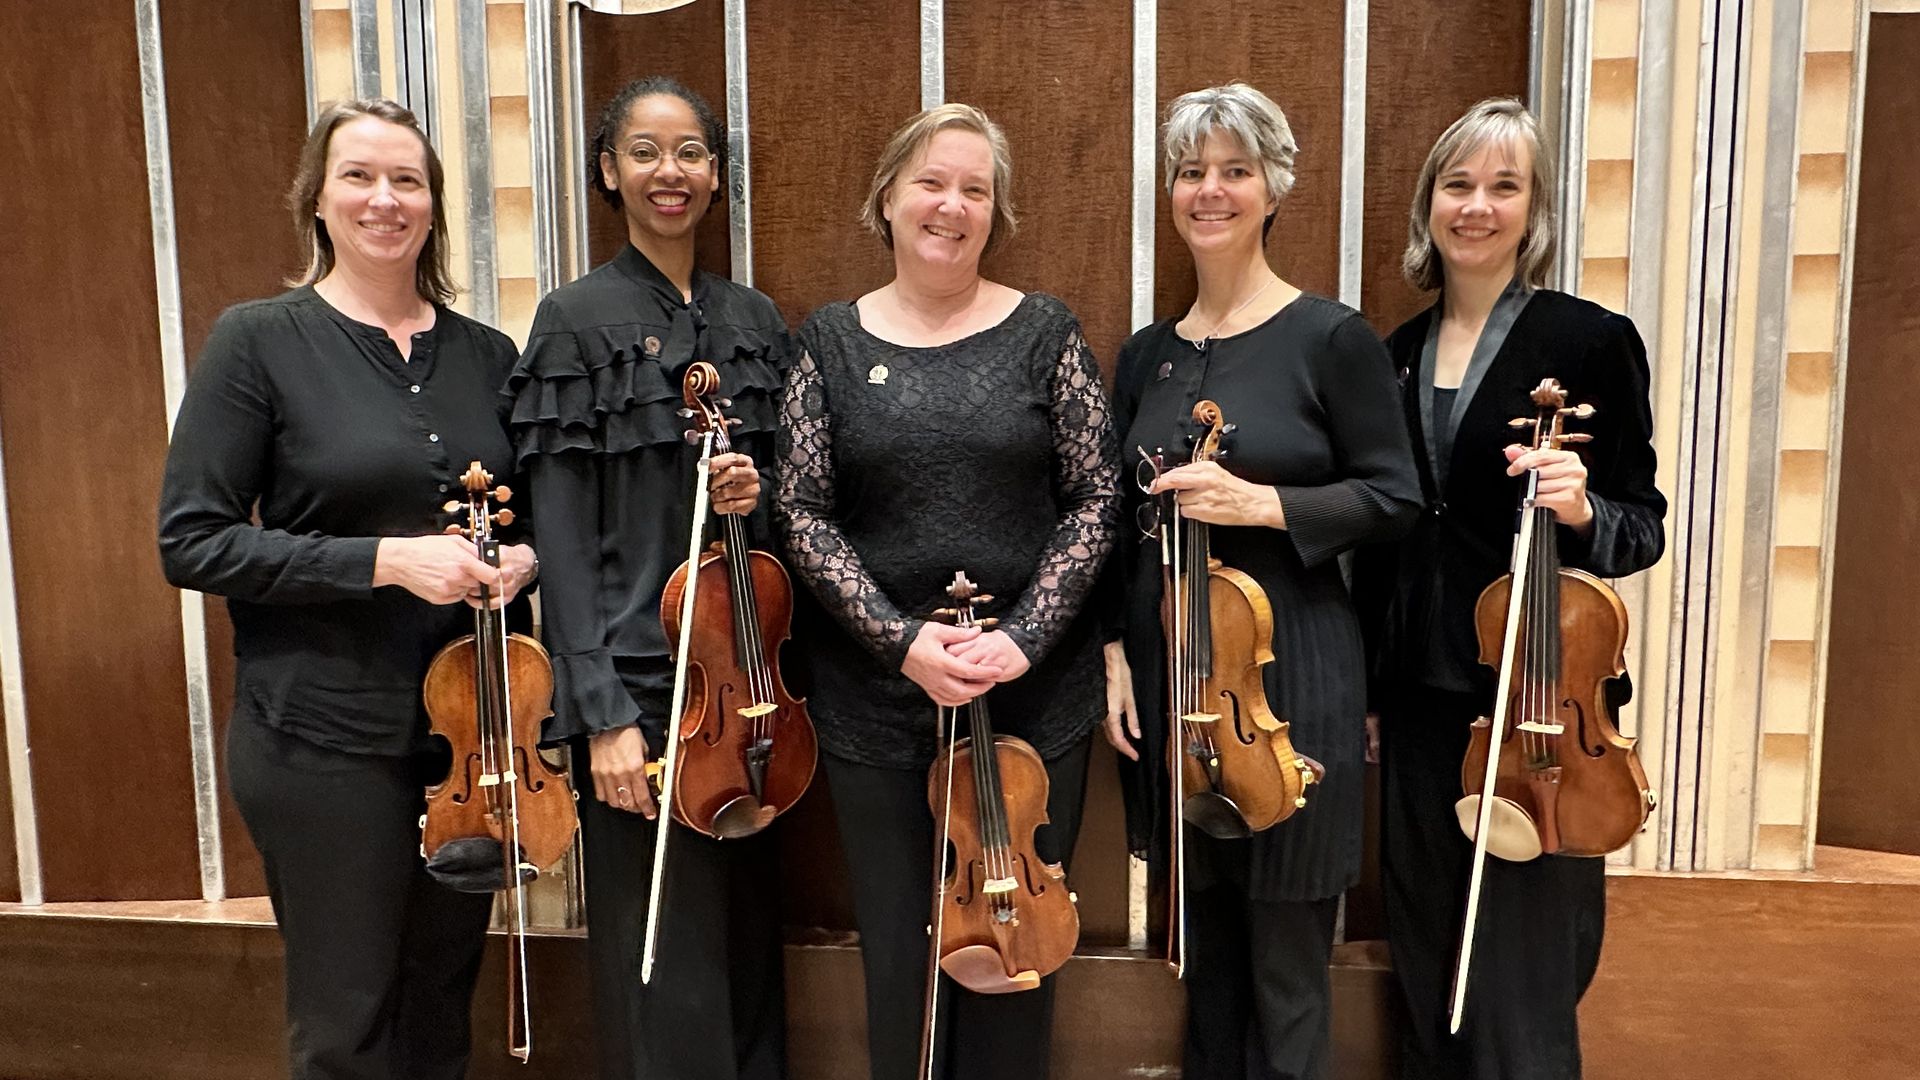 Five women with violins dressed in black. 